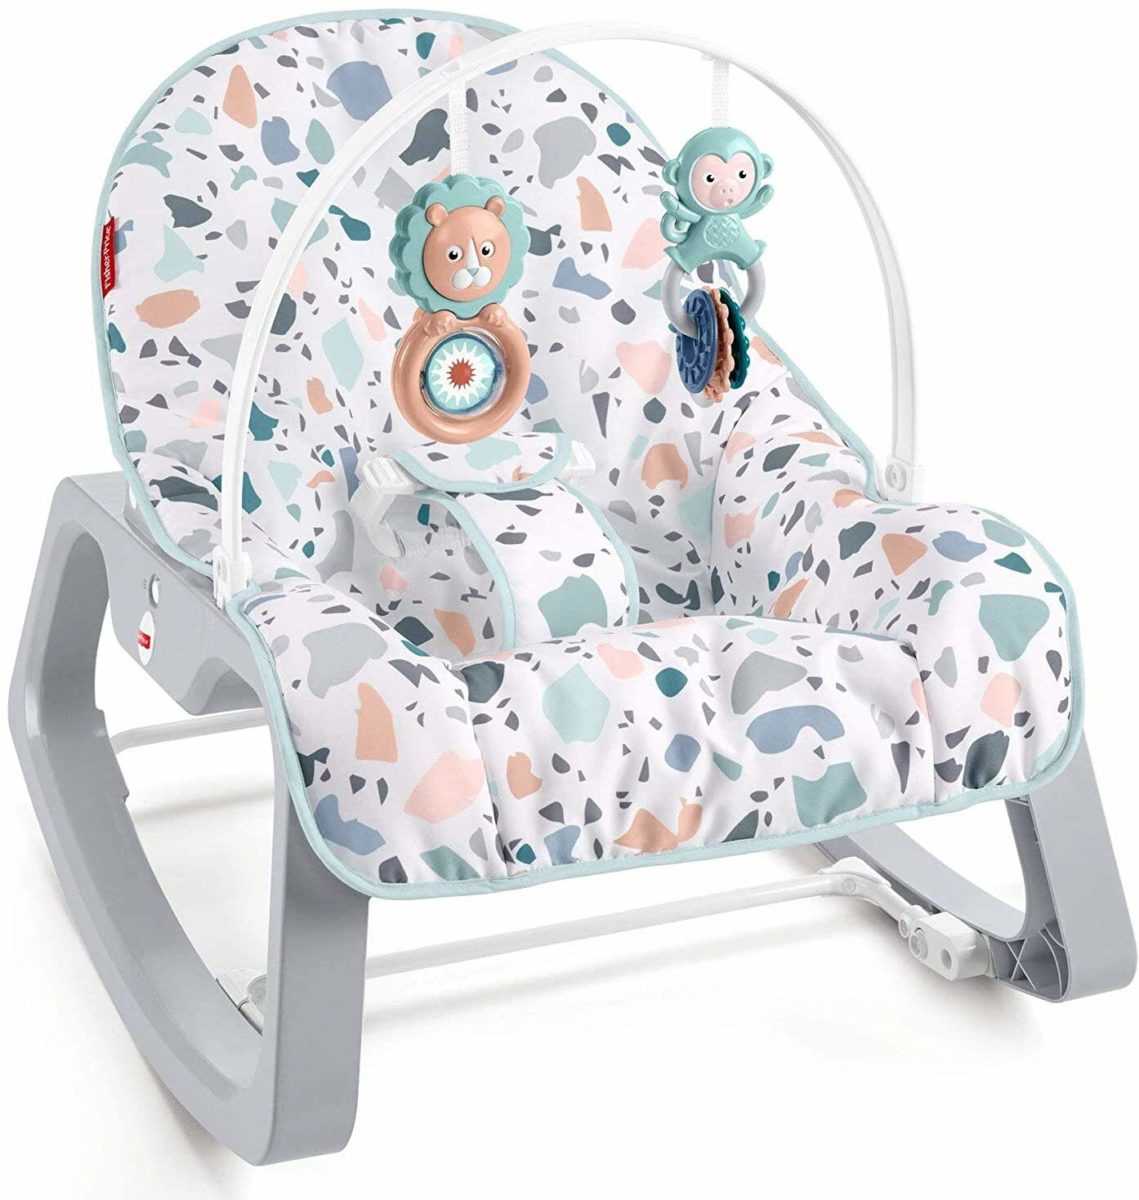 toys for babies: here are 35 gifts that help with a baby's early development | in this list, you will find 35 toys that any baby would love.